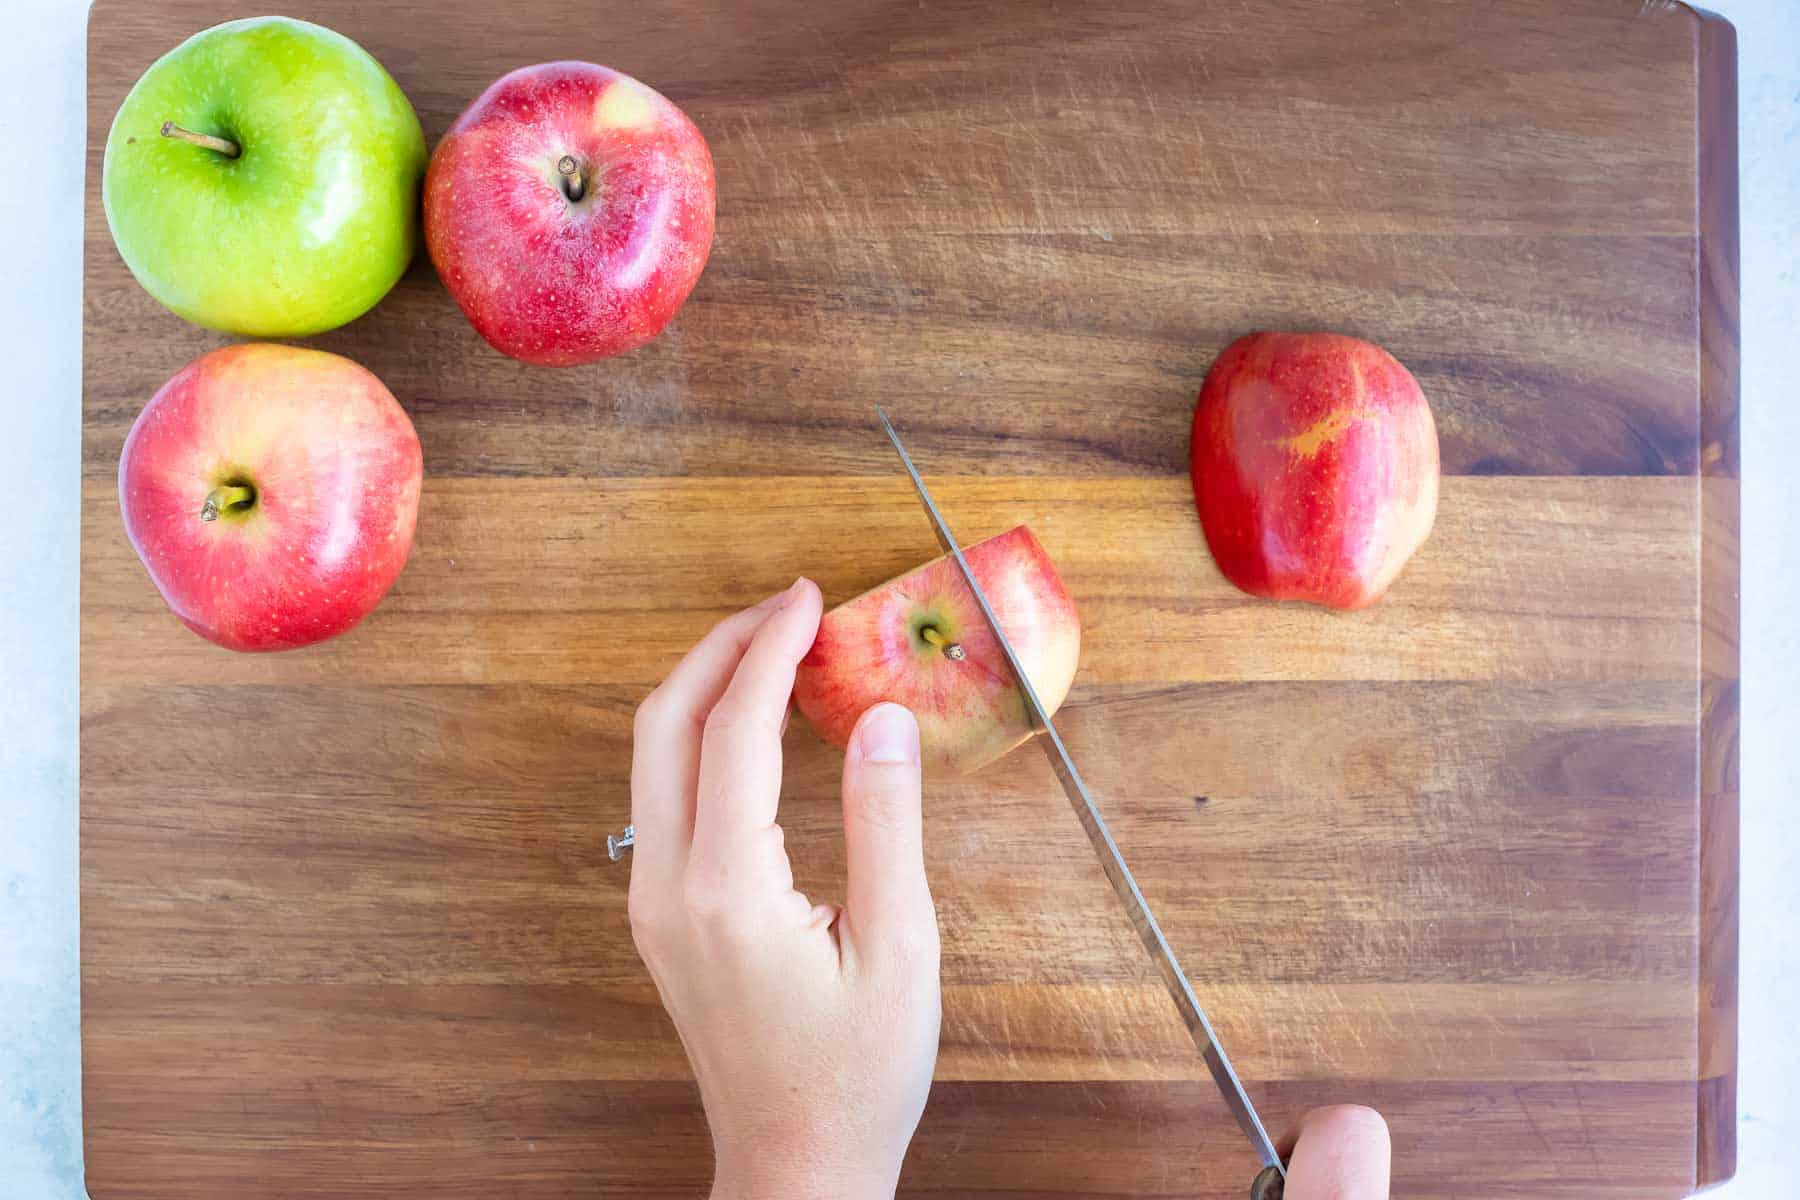 Cutting the side of an apple with a knife  on a cutting board with other apples waiting to be cut.